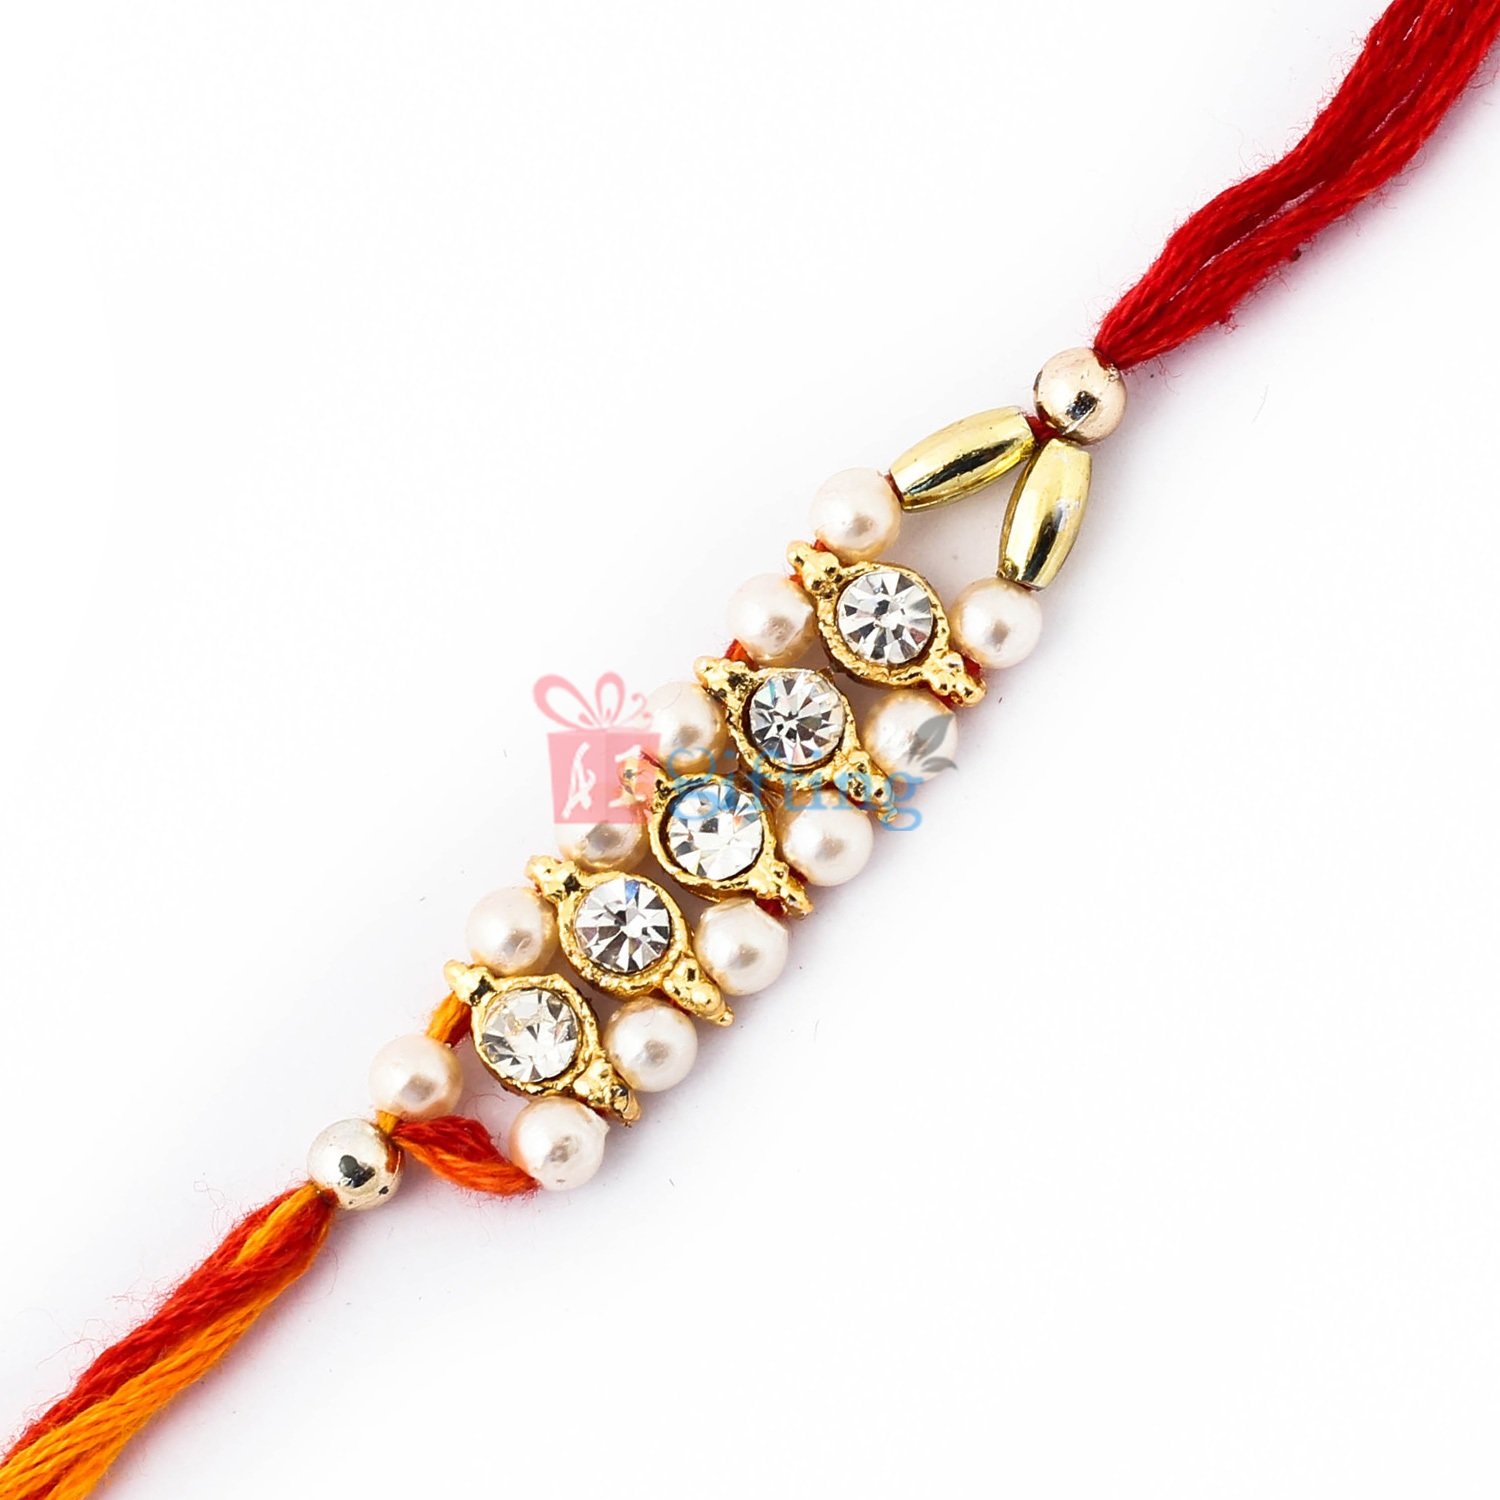 Royal work of diamonds and pearl in two color mauli Rakhi